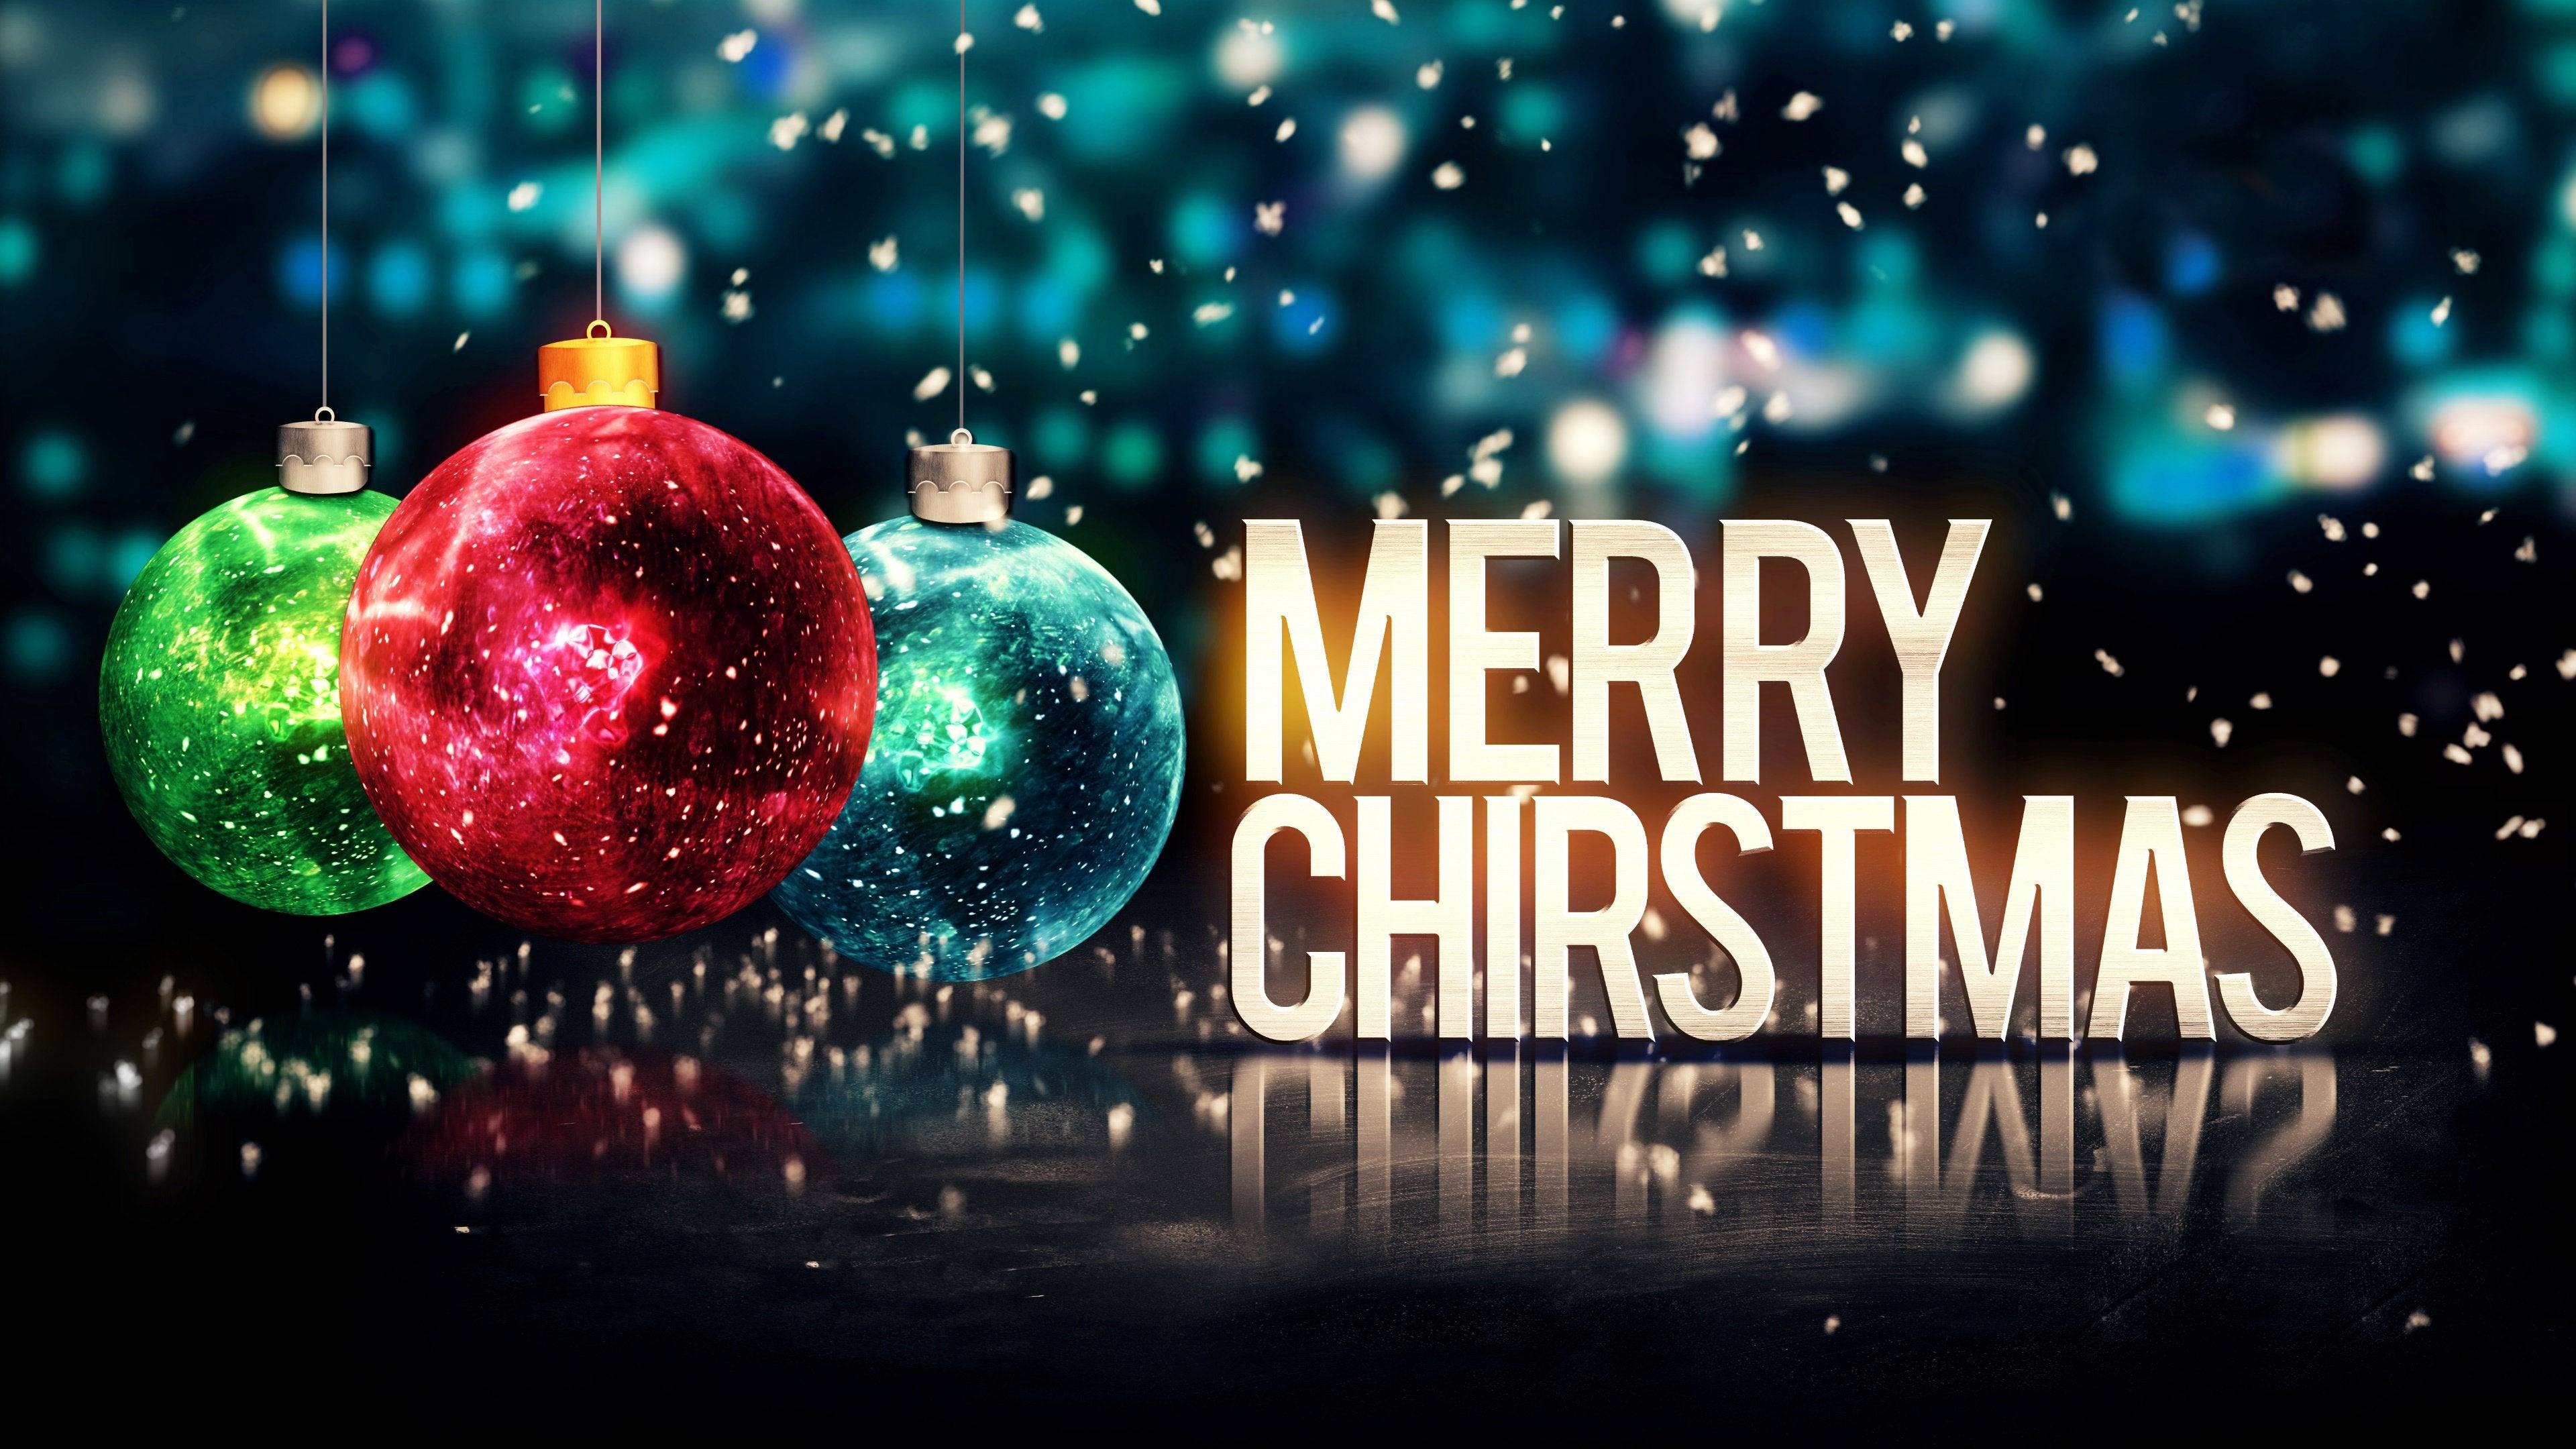 Christmas Party Background Images  Free Download on Freepik